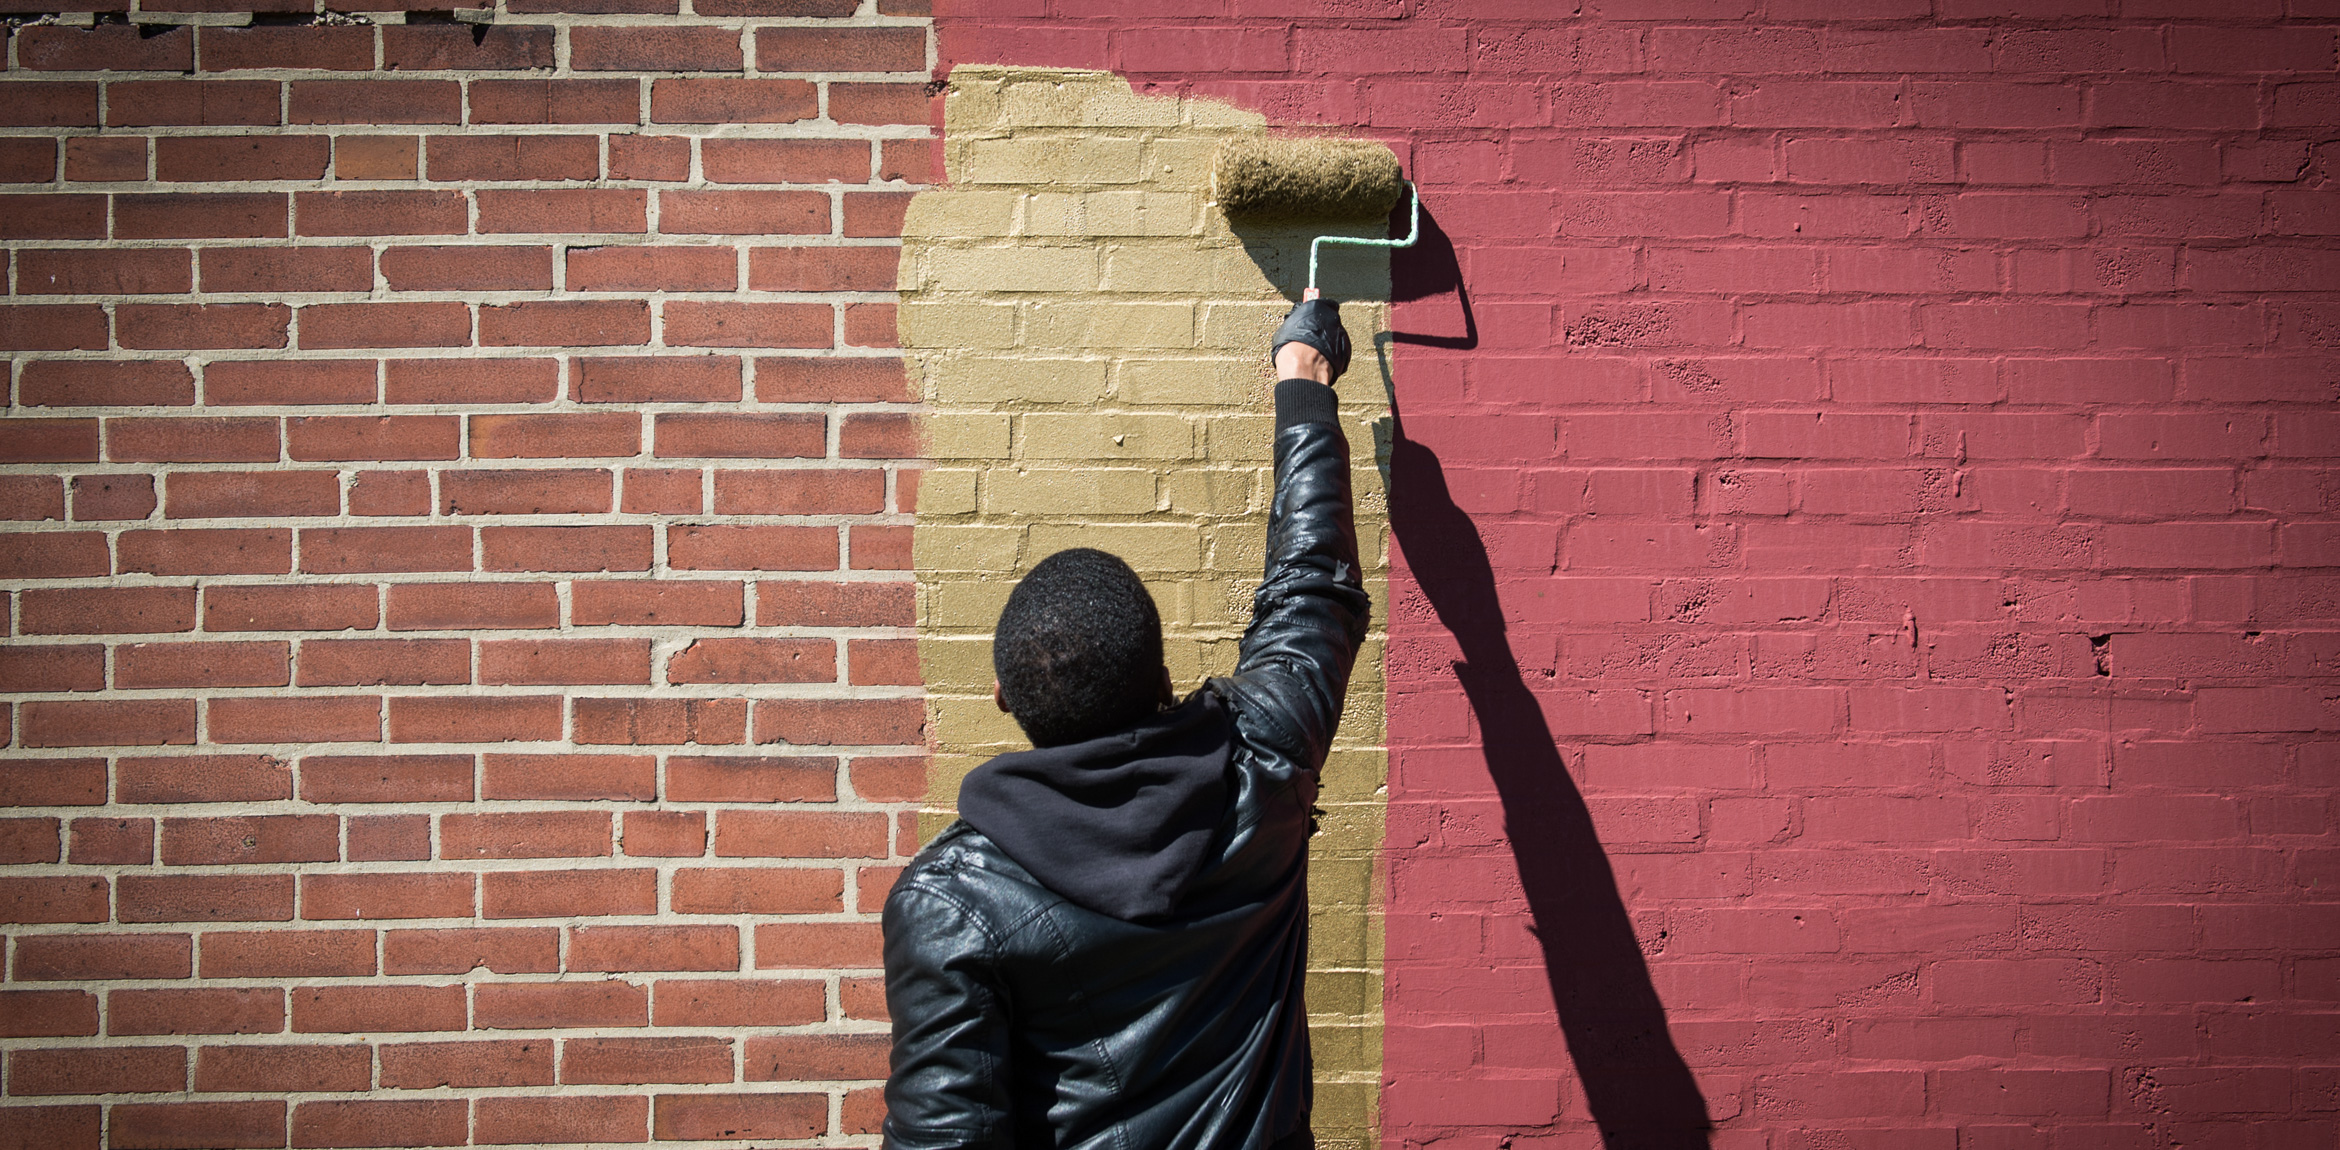 Amanda Williams applies the first strokes of golden paint to 3721 Washington Boulevard's red brick wall.